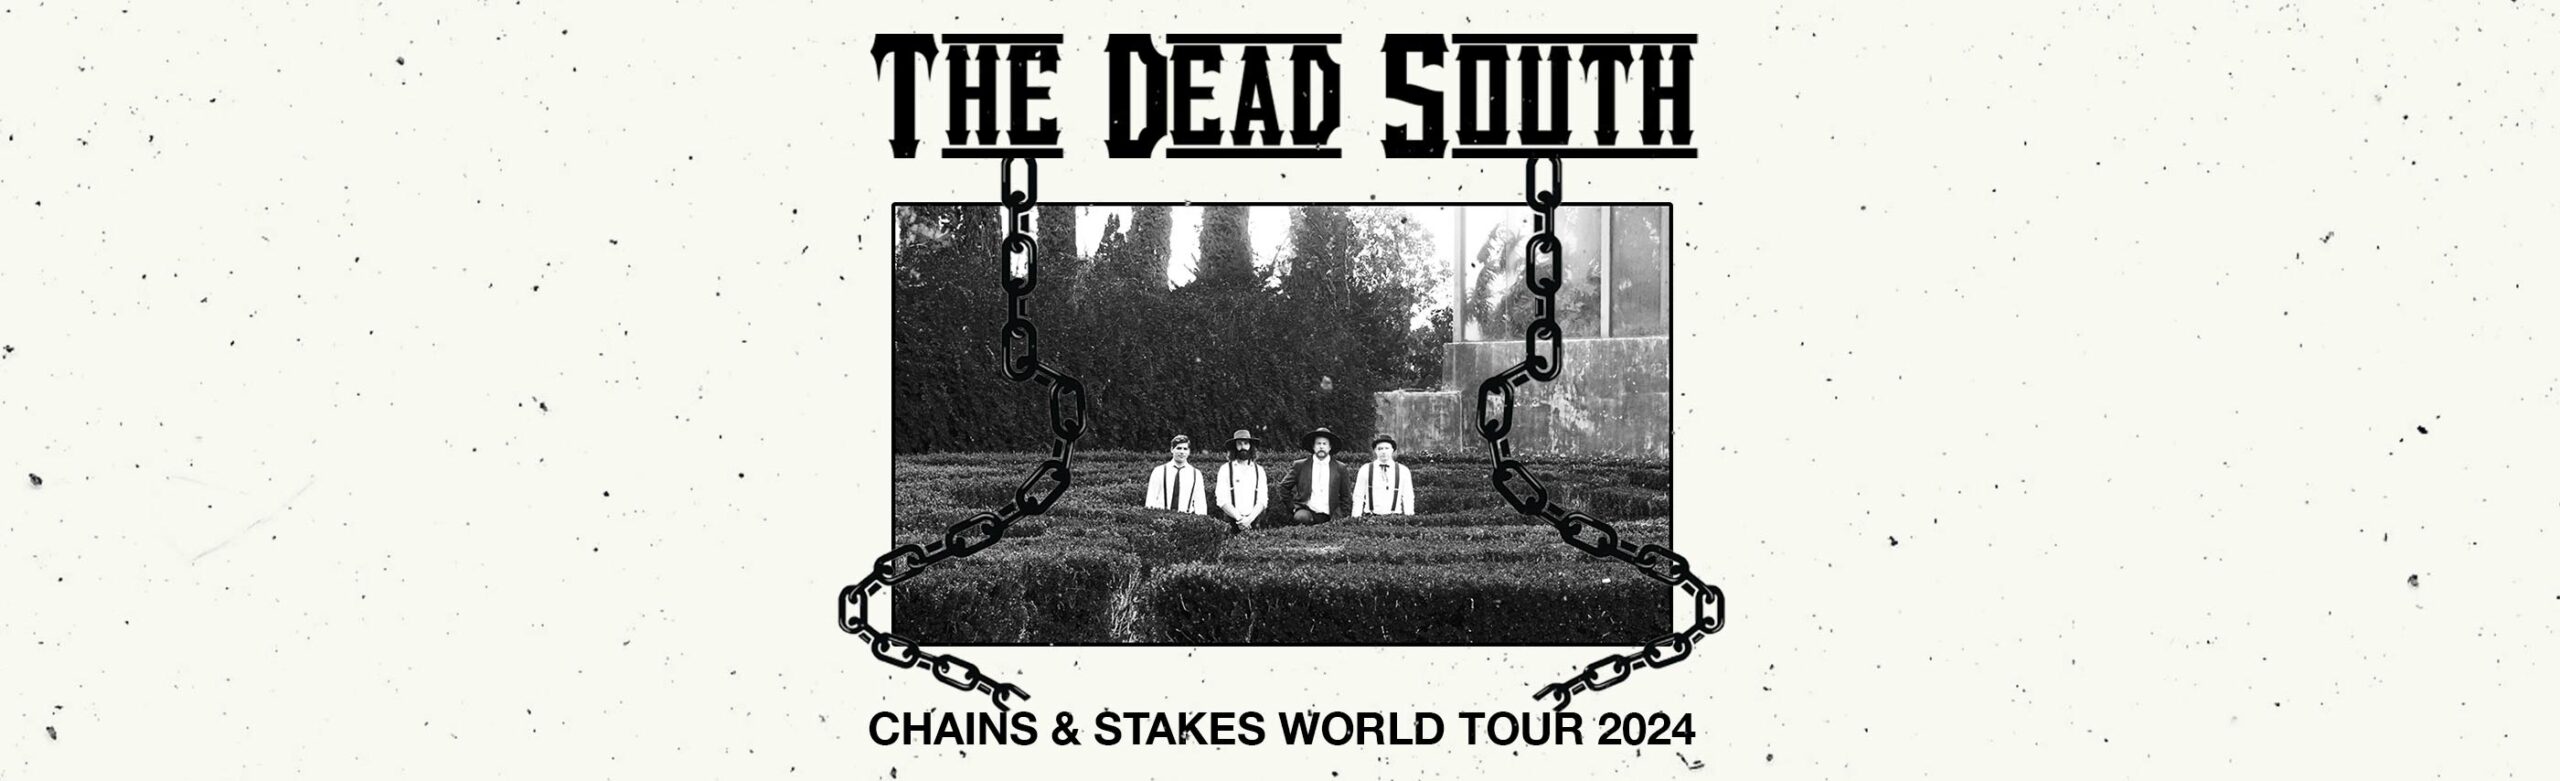 The Dead South Announce Concert at KettleHouse Amphitheater in 2024 Image